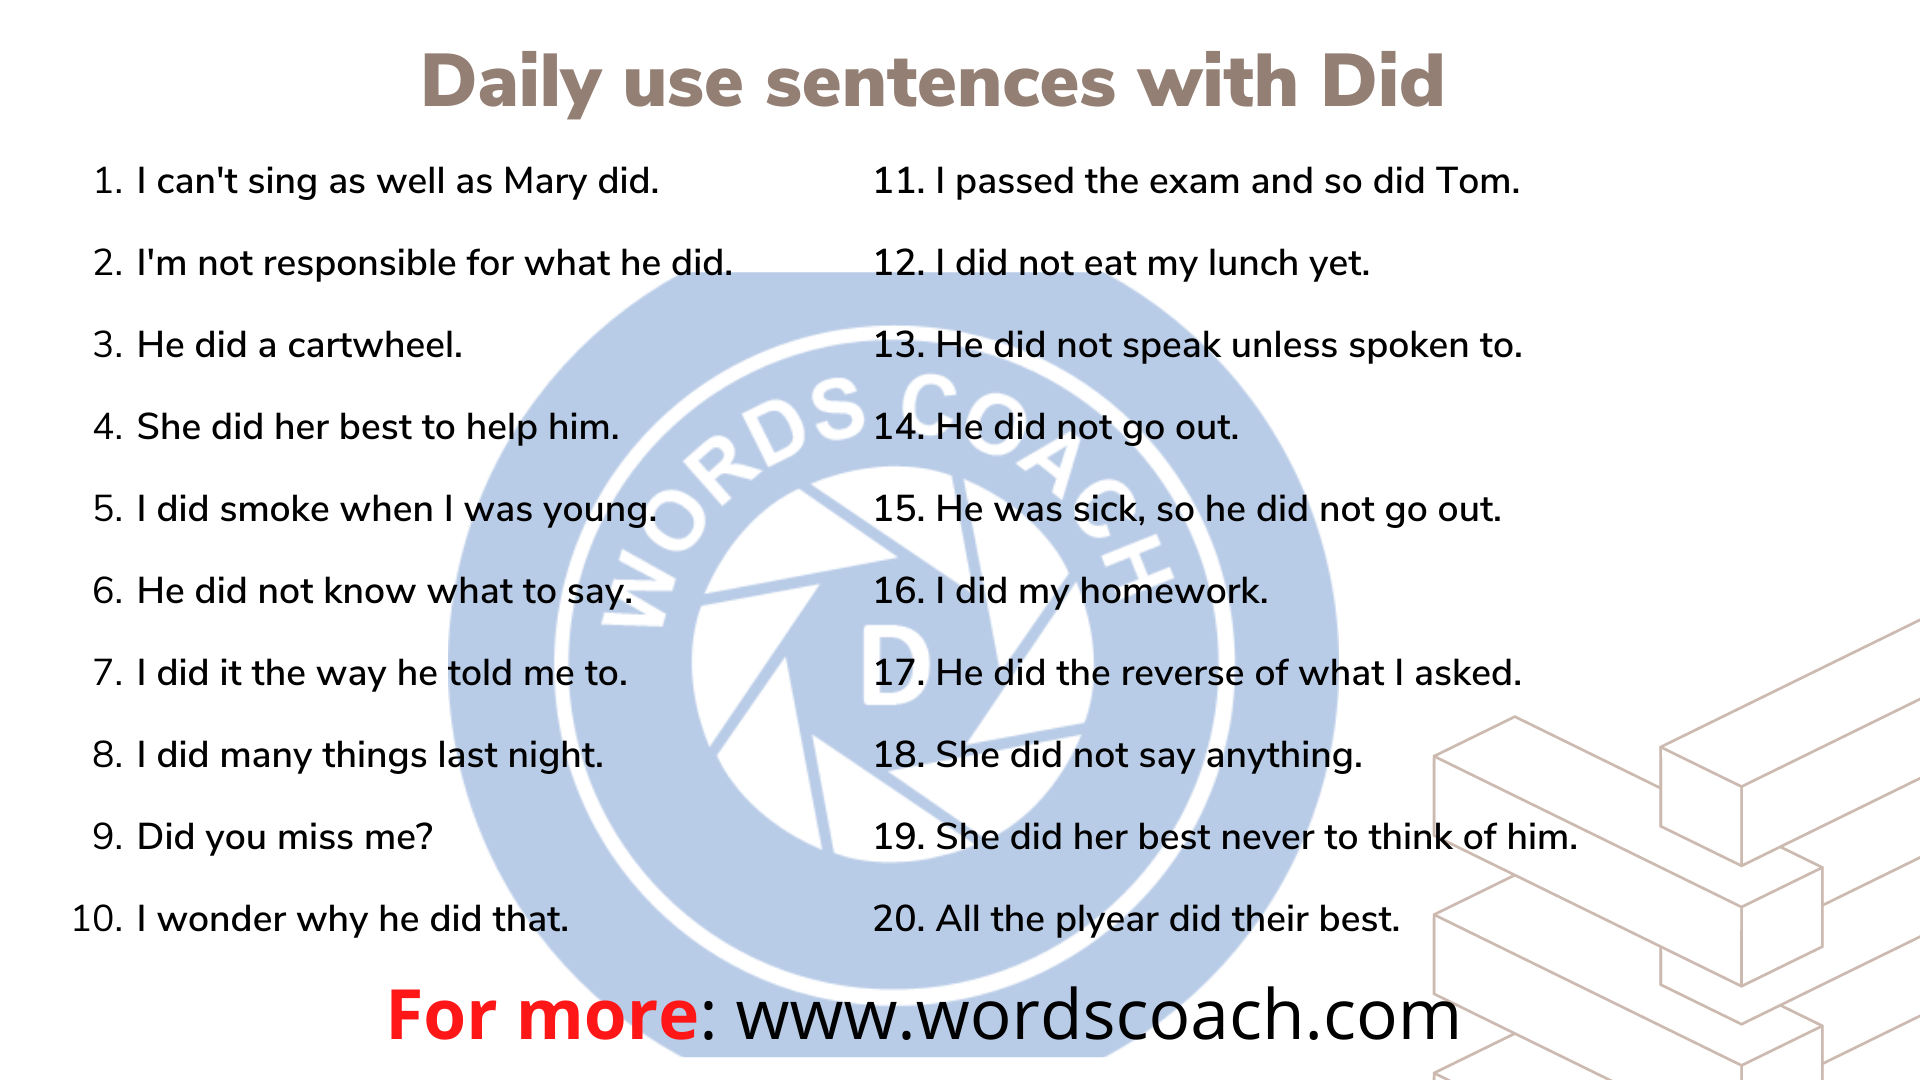 How and when to use Did with Daily use sentences